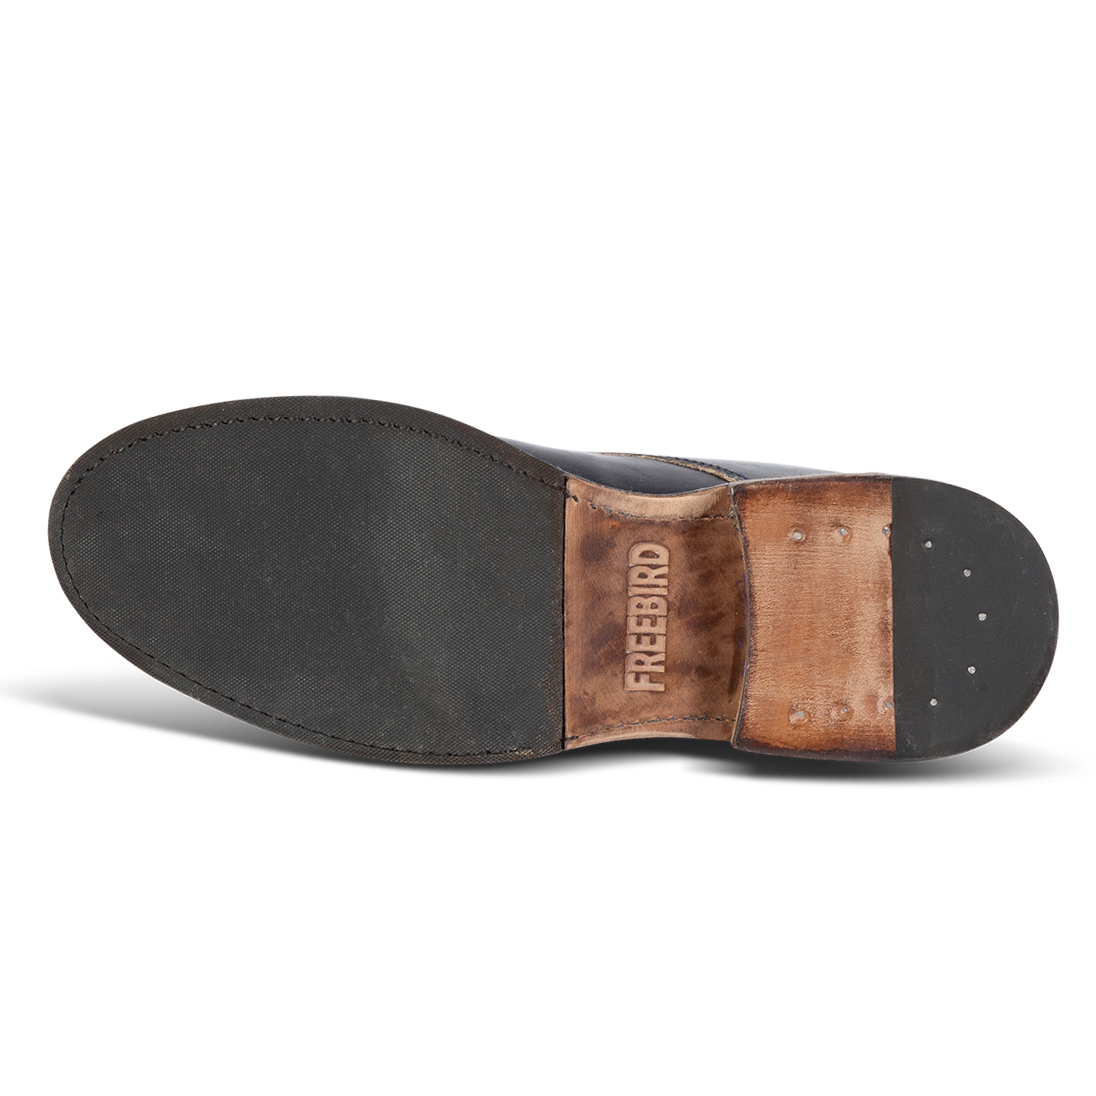 Rubber sole imprinted with FREEBIRD on men's McCoy navy shoe